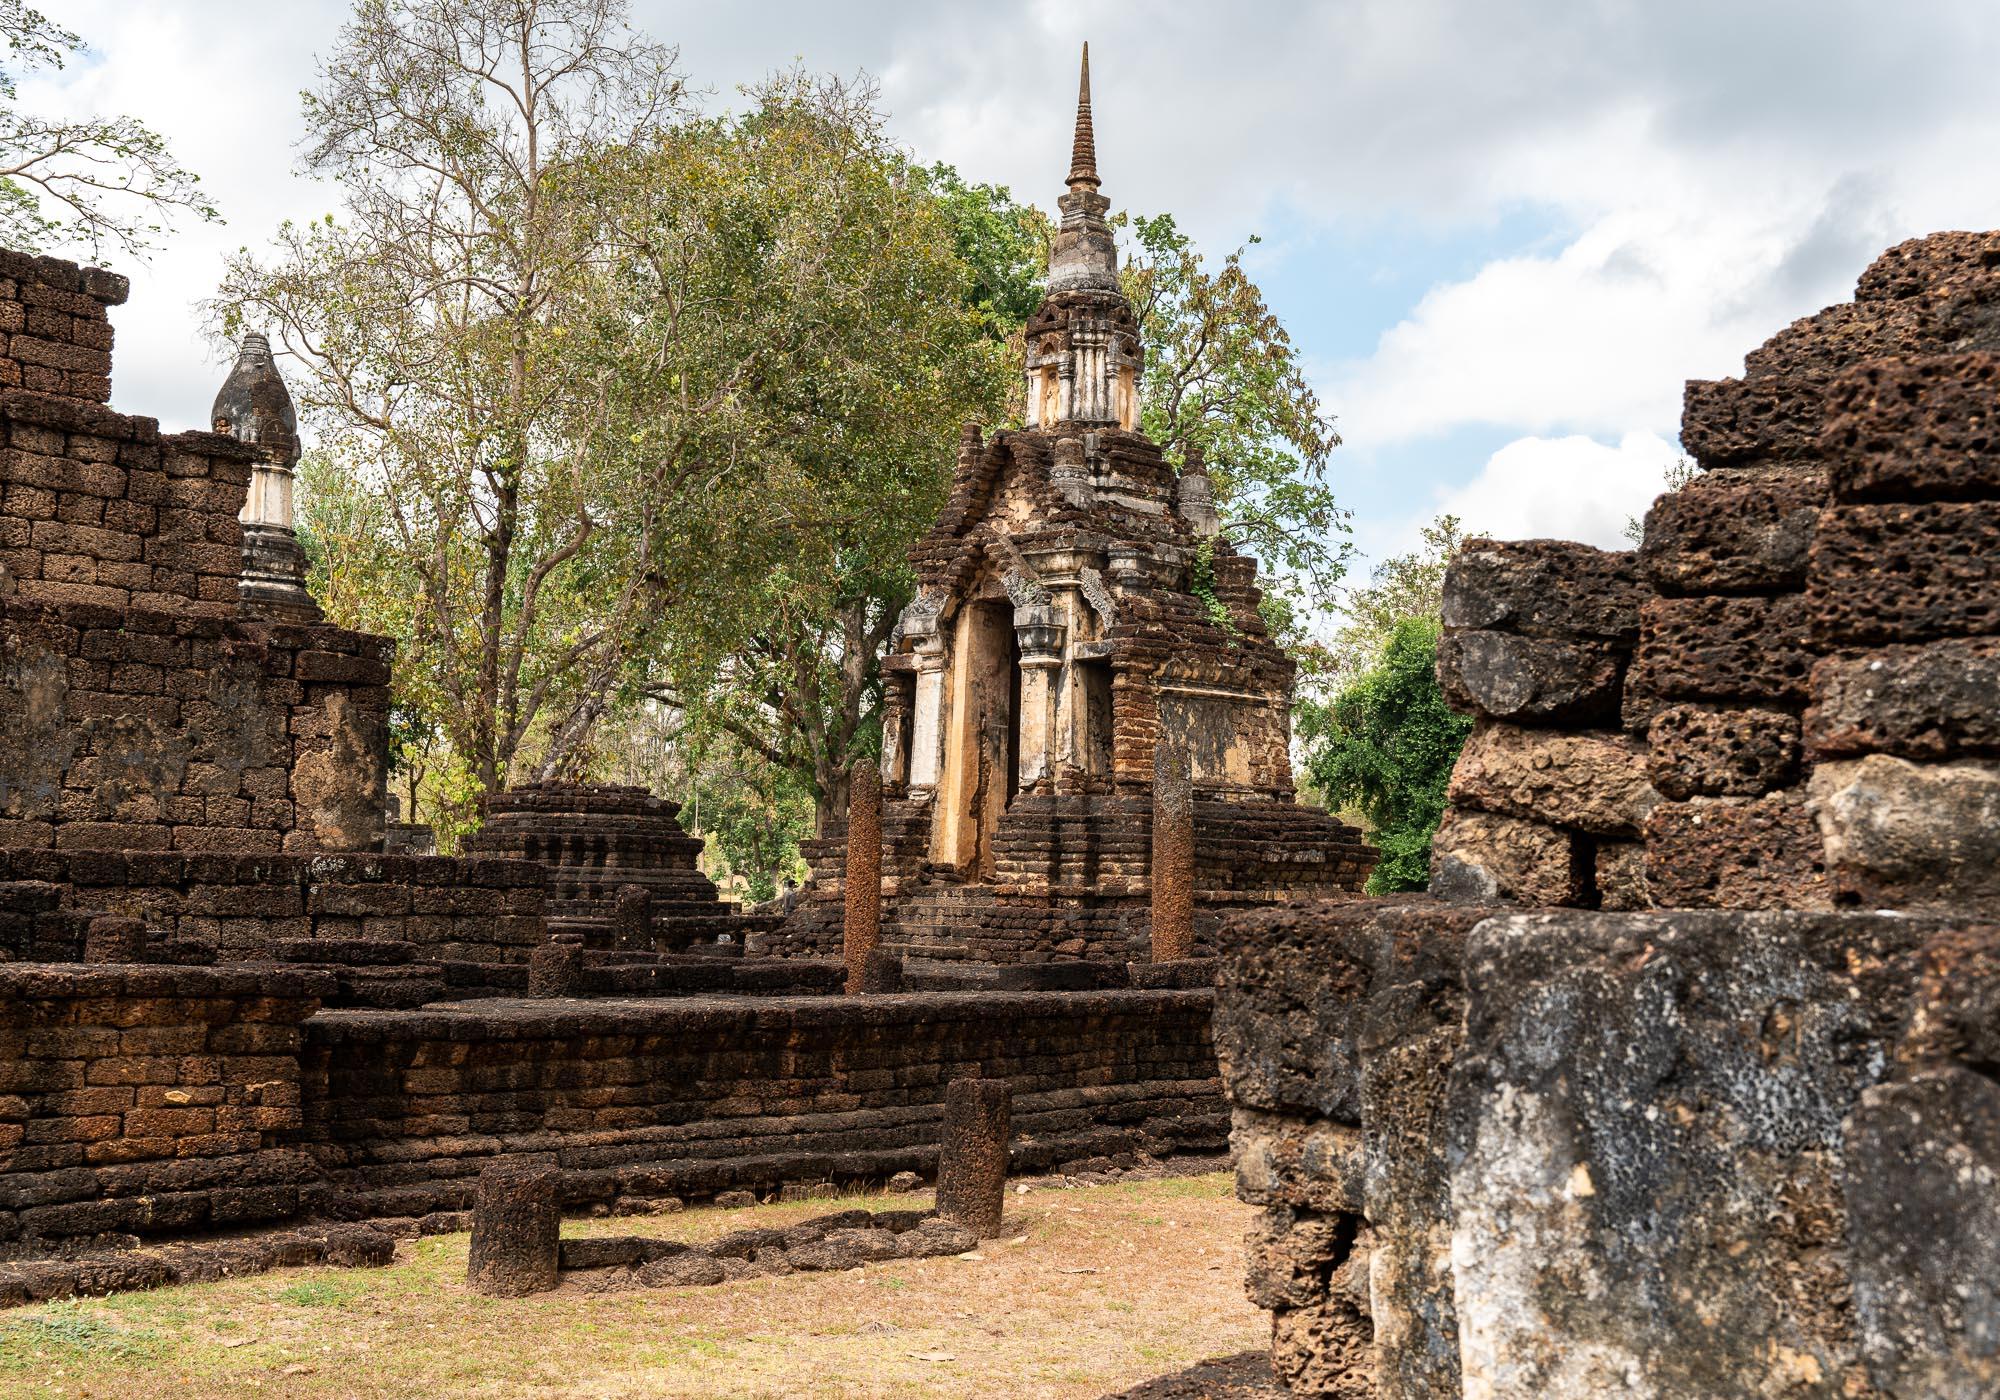 One of the stupas within Wat Chedi Ched Thaeo, which has nine rows of 33 stupas in total. – © Michael Turtle